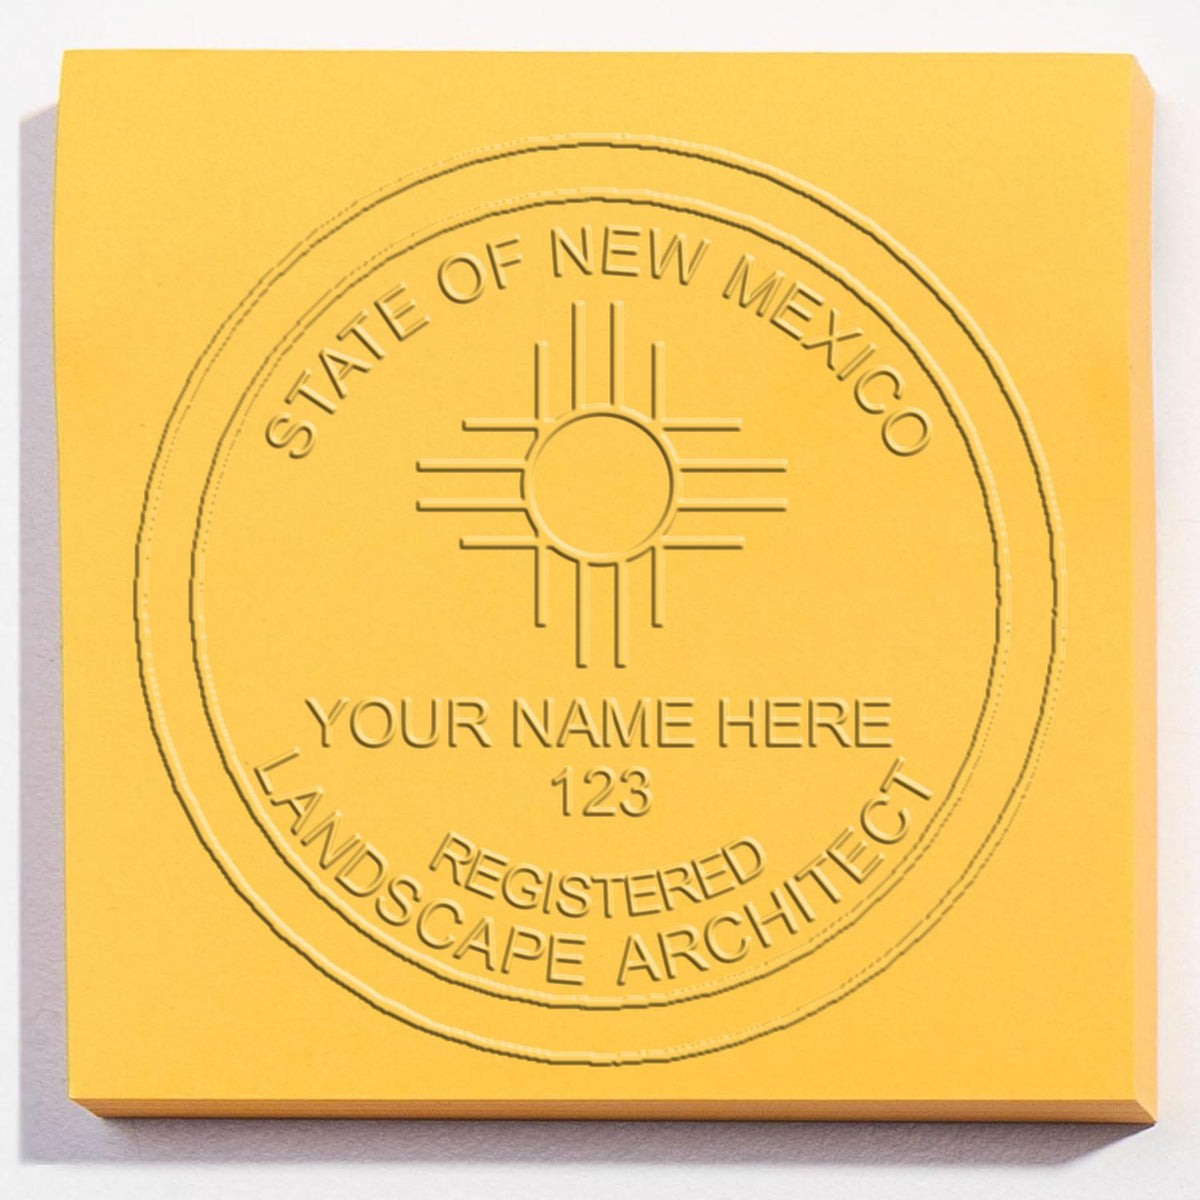 An in use photo of the Hybrid New Mexico Landscape Architect Seal showing a sample imprint on a cardstock